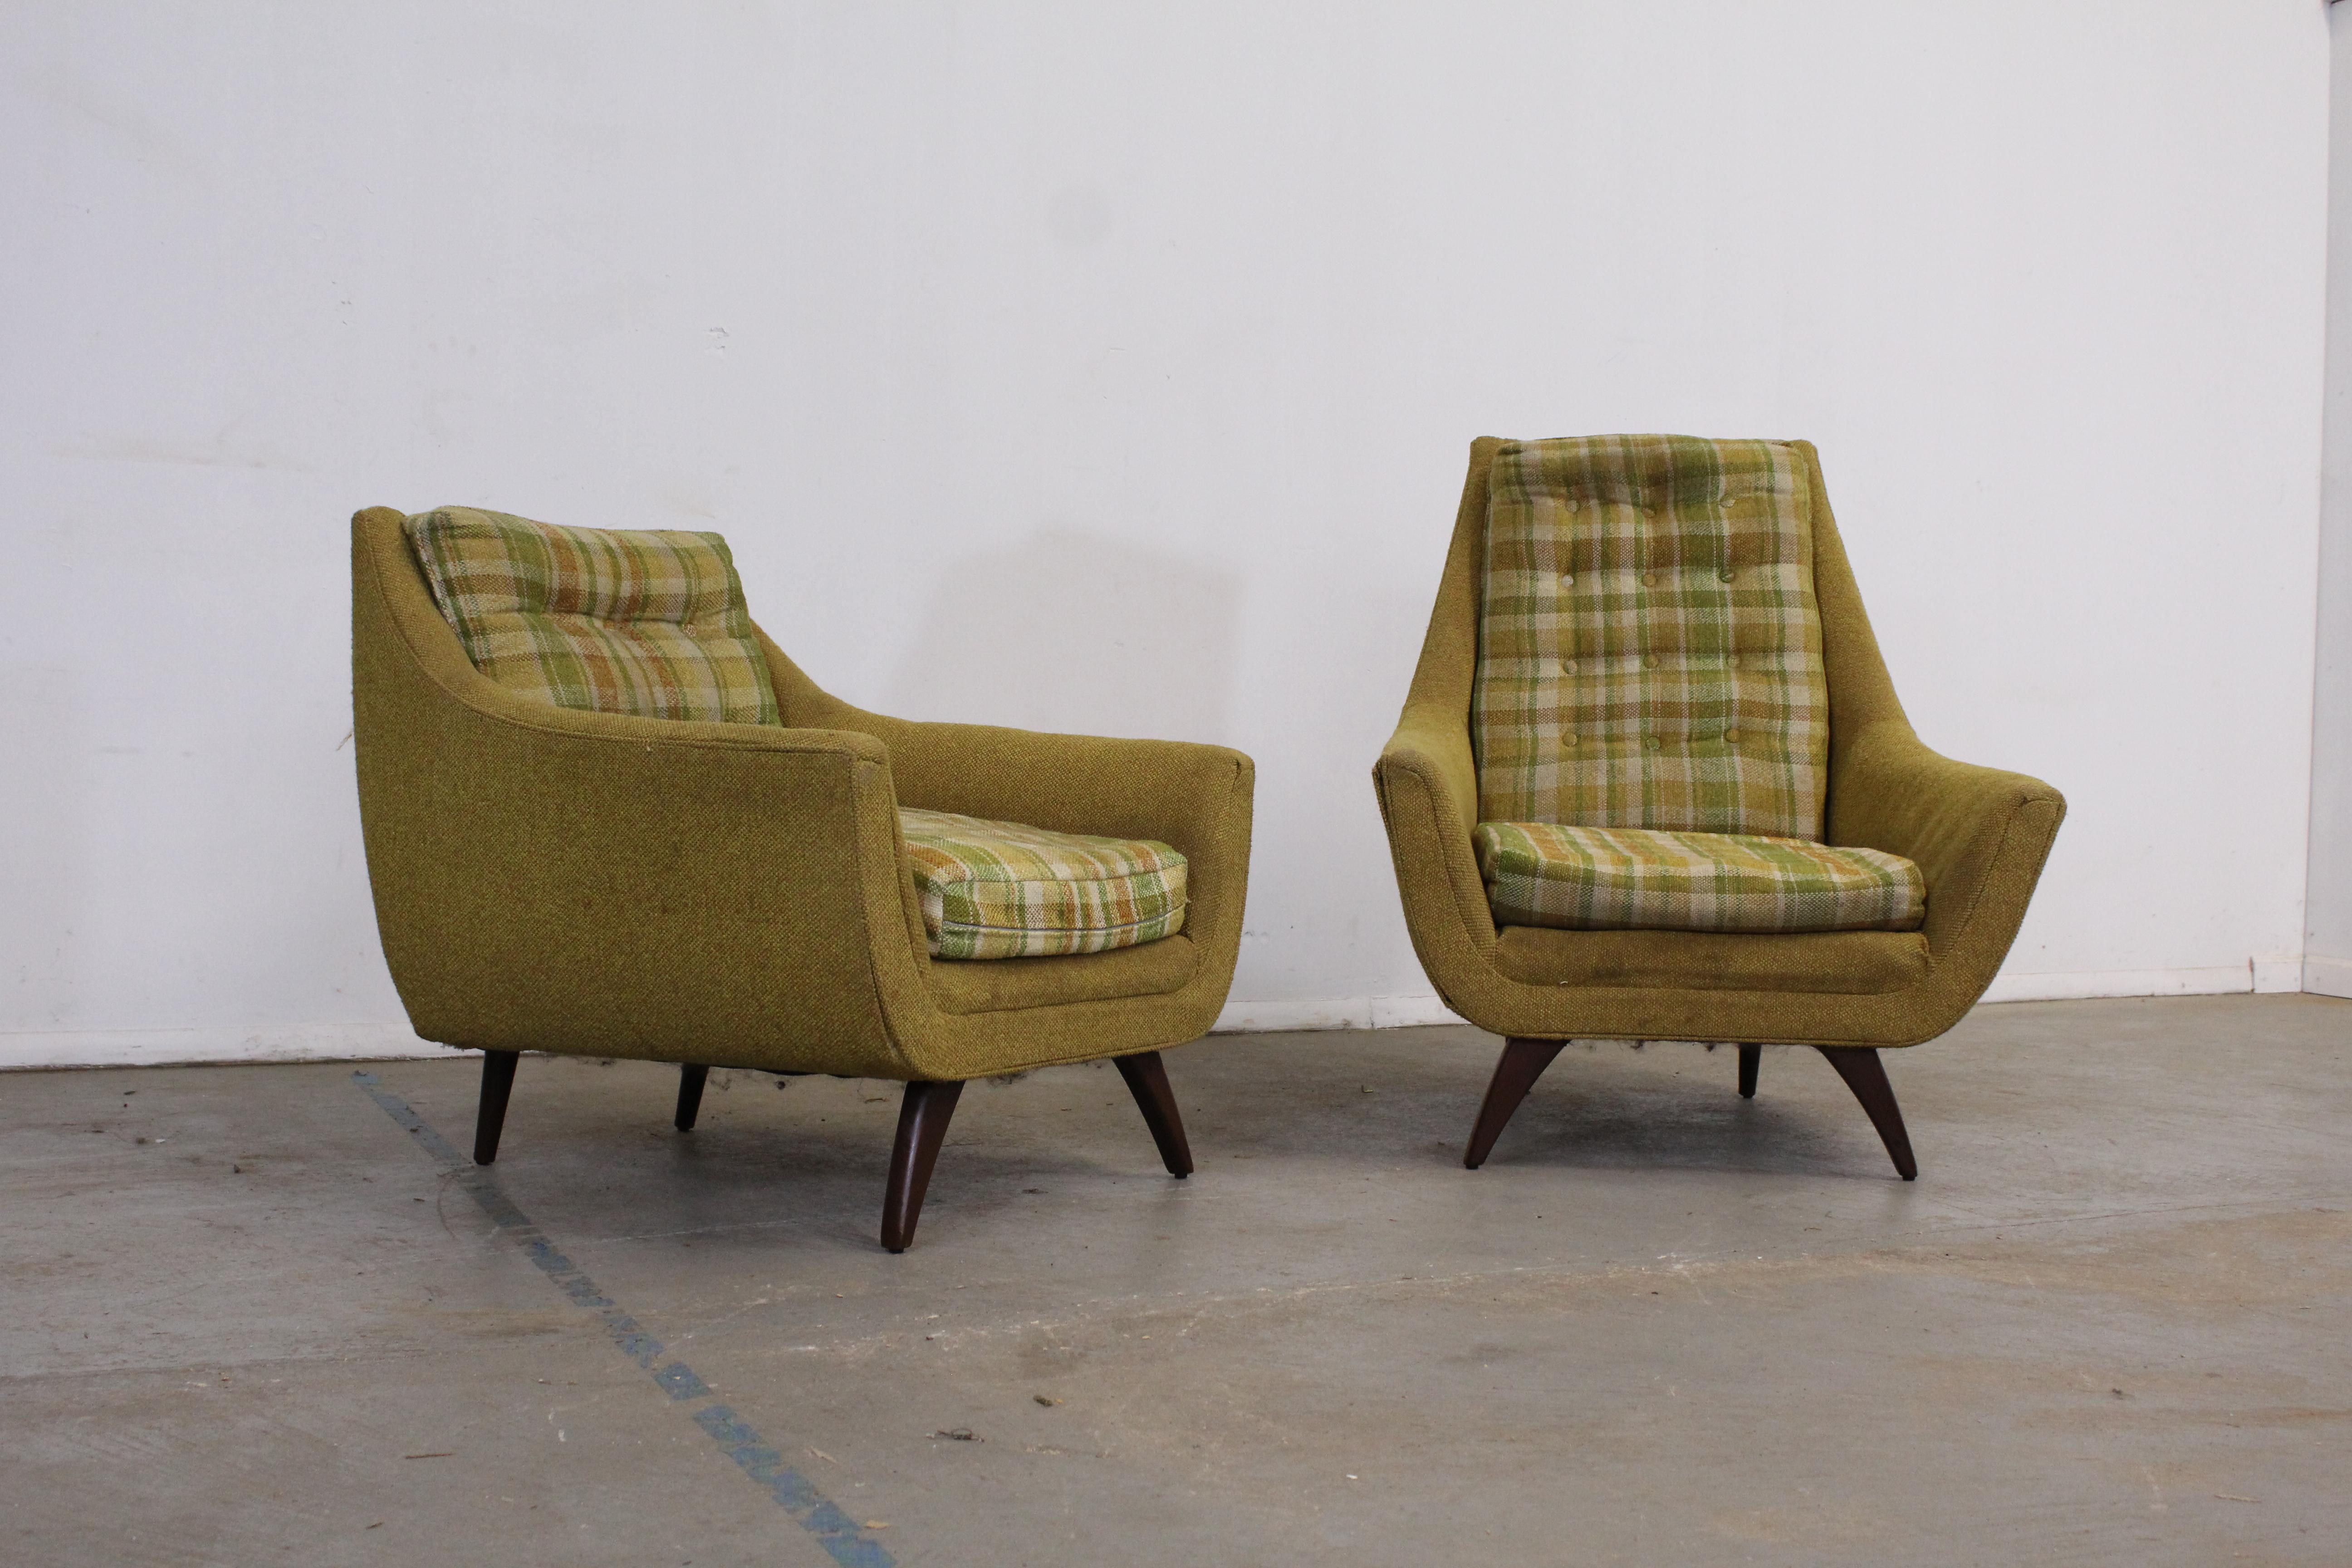 Offered is a pair of gorgeous His/Hers Mid-Century Modern lounge chairs similar to the style of Adrian Pearsall. Absolutely incredible lines on these chairs. The chairs are in need of restoration(cushions and upholstery). They are in good structural